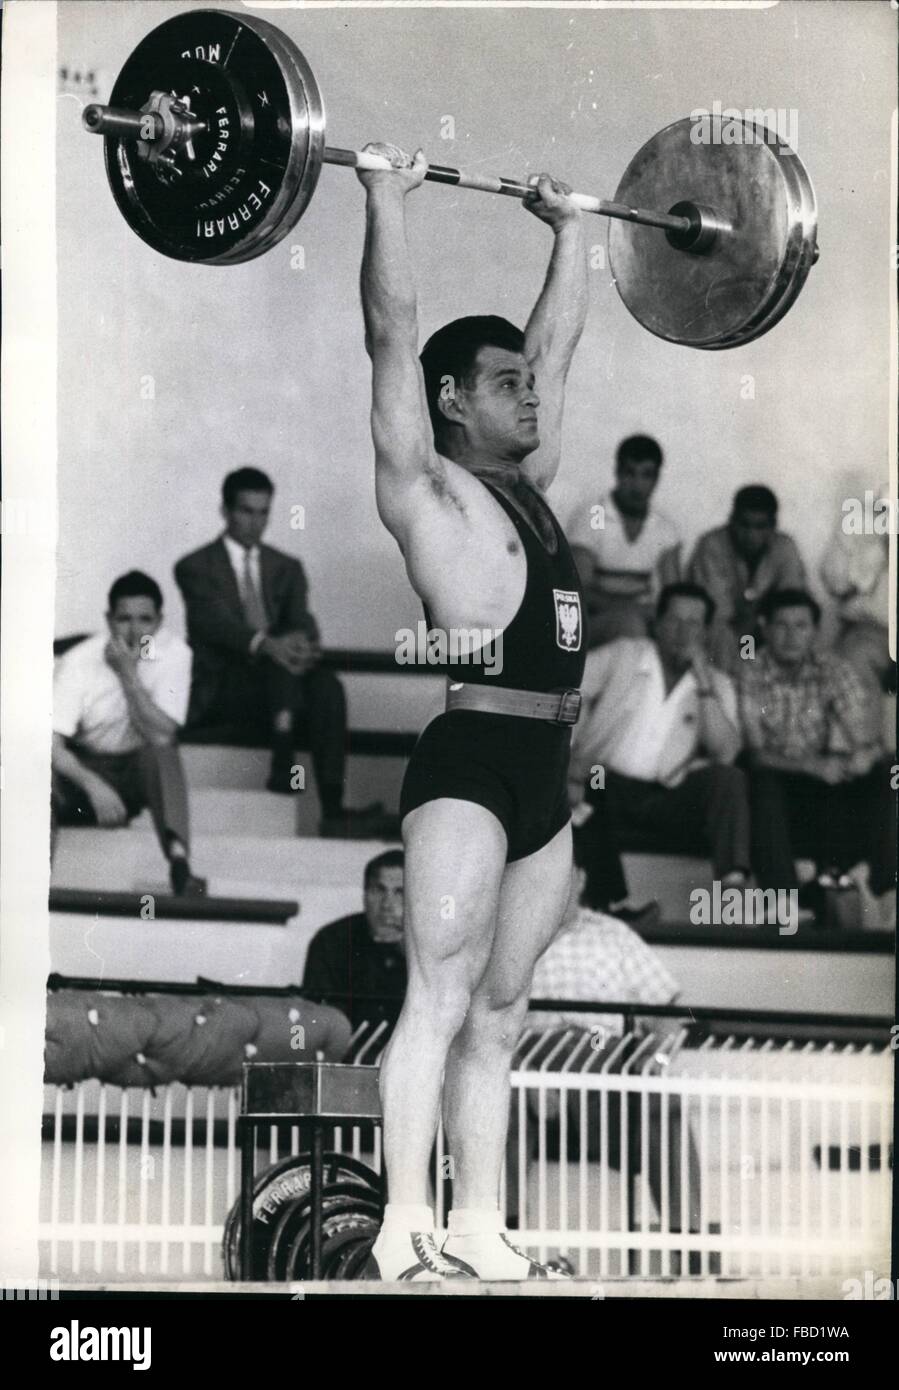 1968 - Polish heavyweight Palinski wins gold medal in ight lifting event breaks world record. The Polish heavy weight Palinski lifted 178,500 kgs. and won the gold medal in the weight lifting event to-day. He also set up new world record lifting 180 kgs. Photo Shows Palinski In action. © Keystone Pictures USA/ZUMAPRESS.com/Alamy Live News Stock Photo